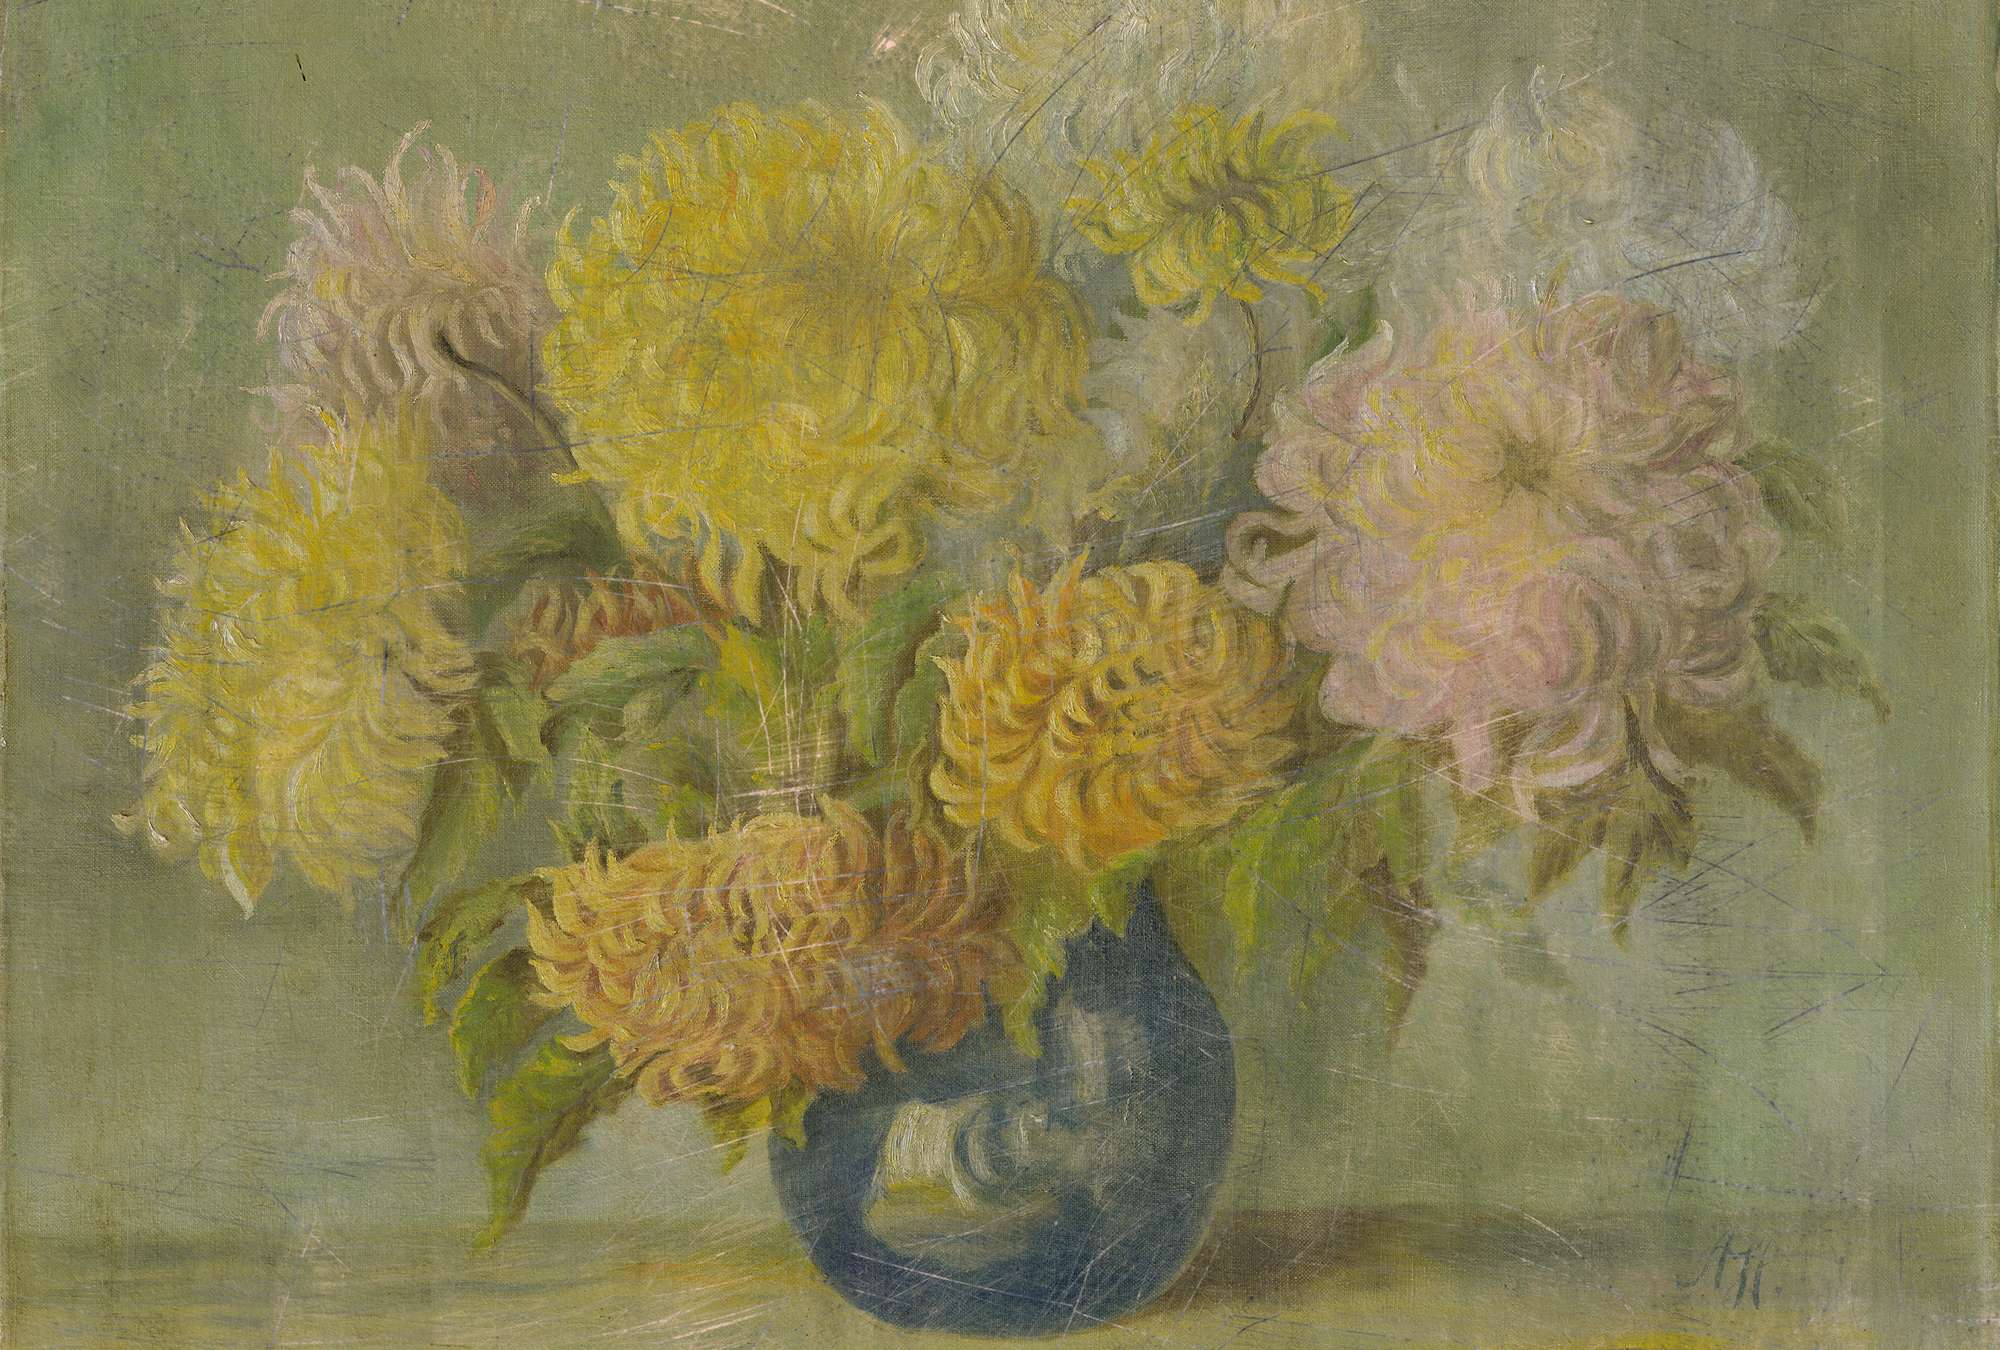             Photo wallpaper oil painting with blue vase and dahlias
        